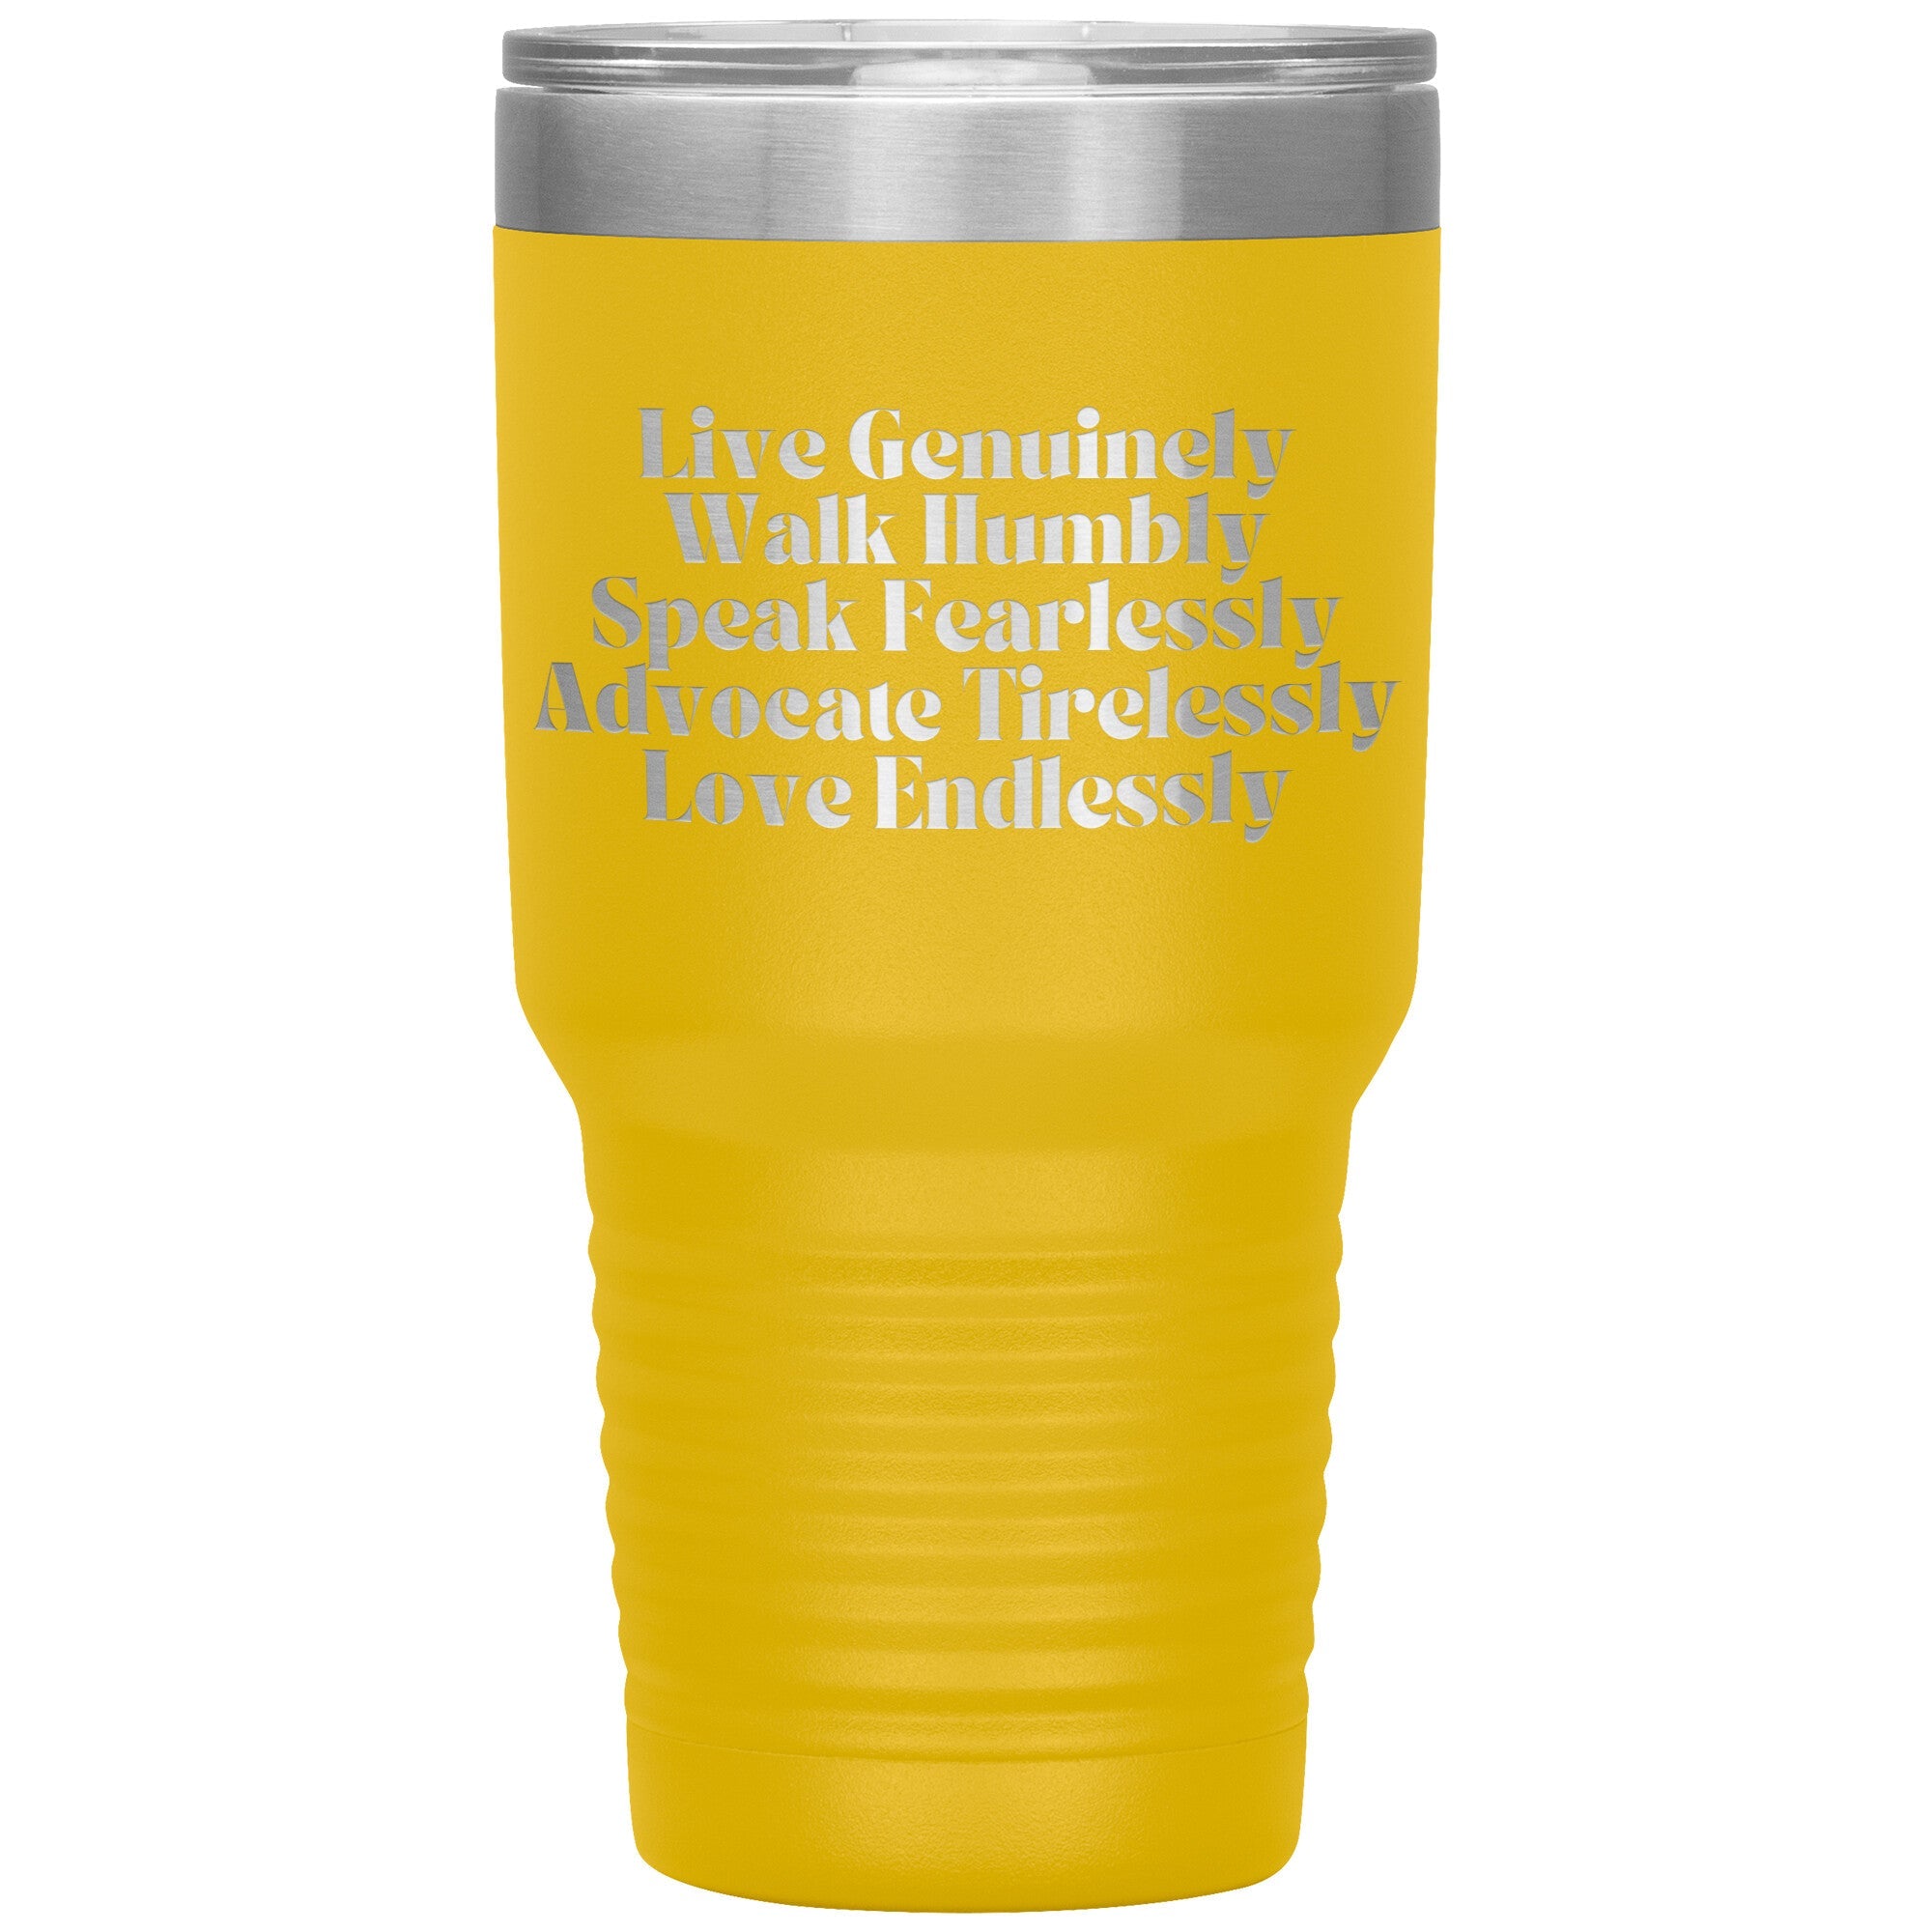 Live Genuinely Engraved 30oz Insulated Tumbler - The Kindness Cause